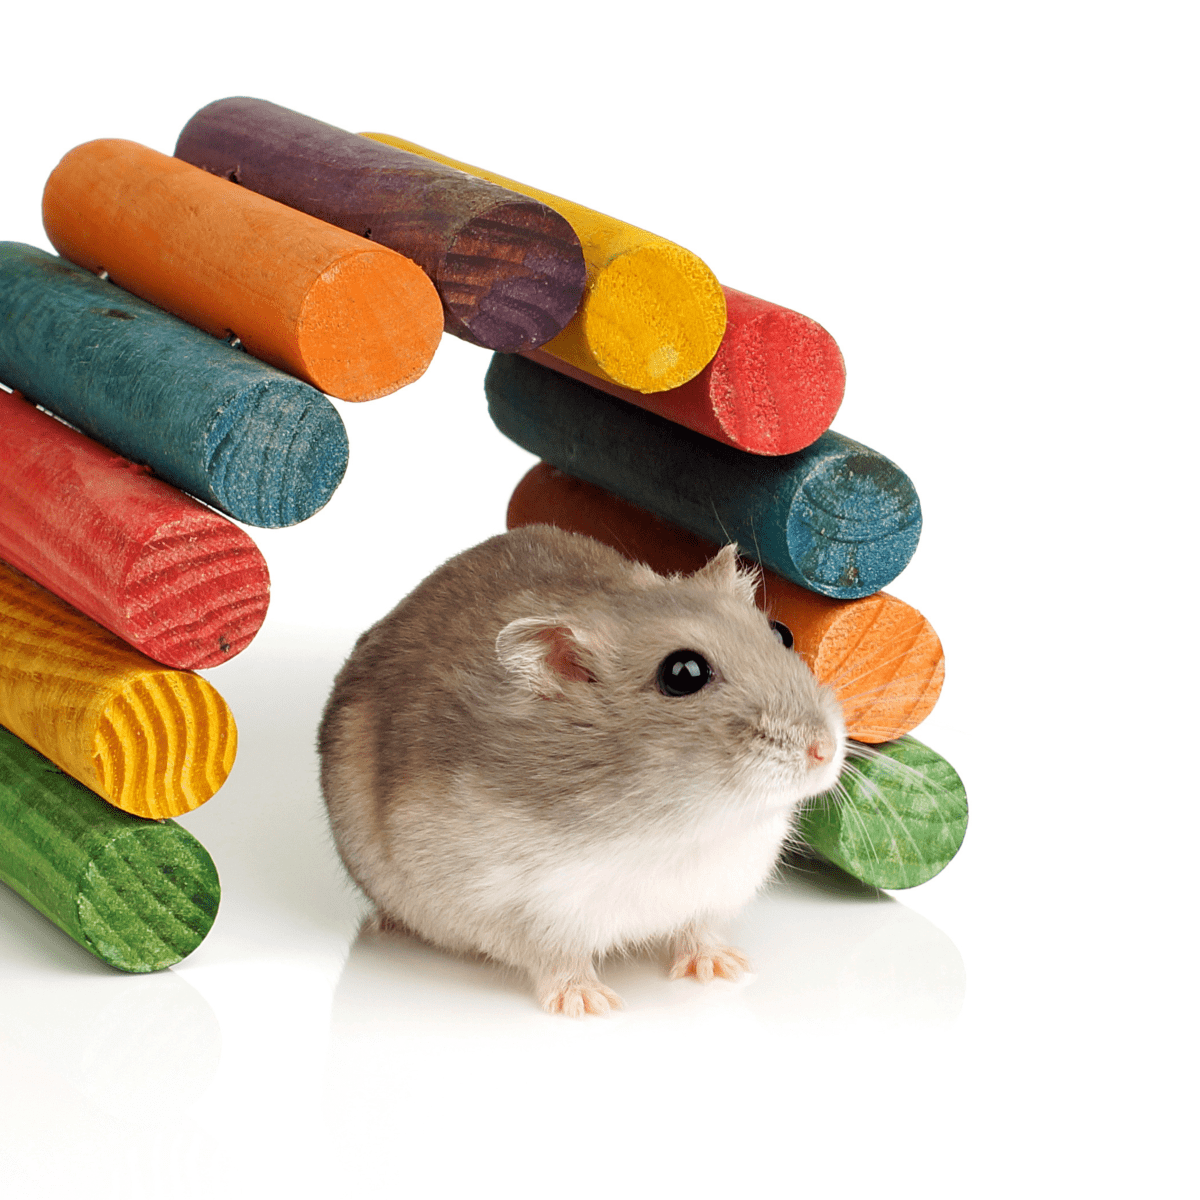 How Long Do Dwarf Hamsters Live? Top Tips To Help Your Pet